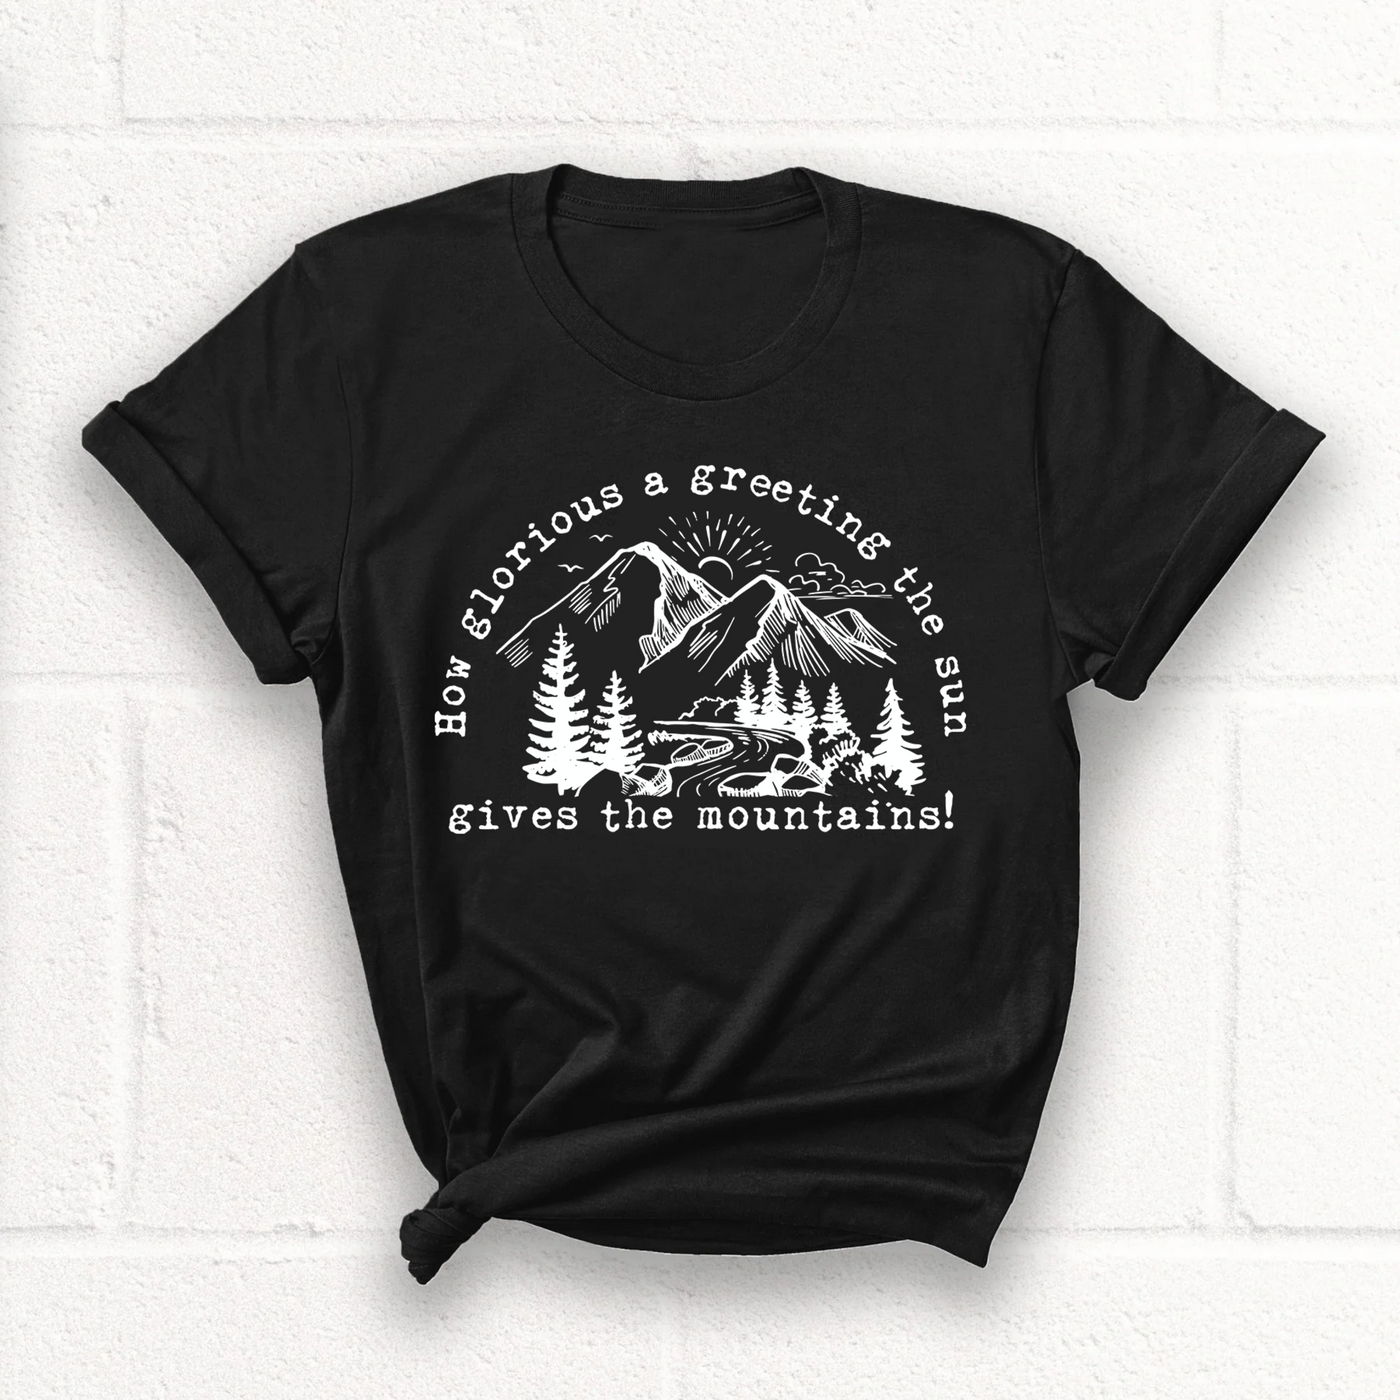 How Glorious a Greeting T-Shirt